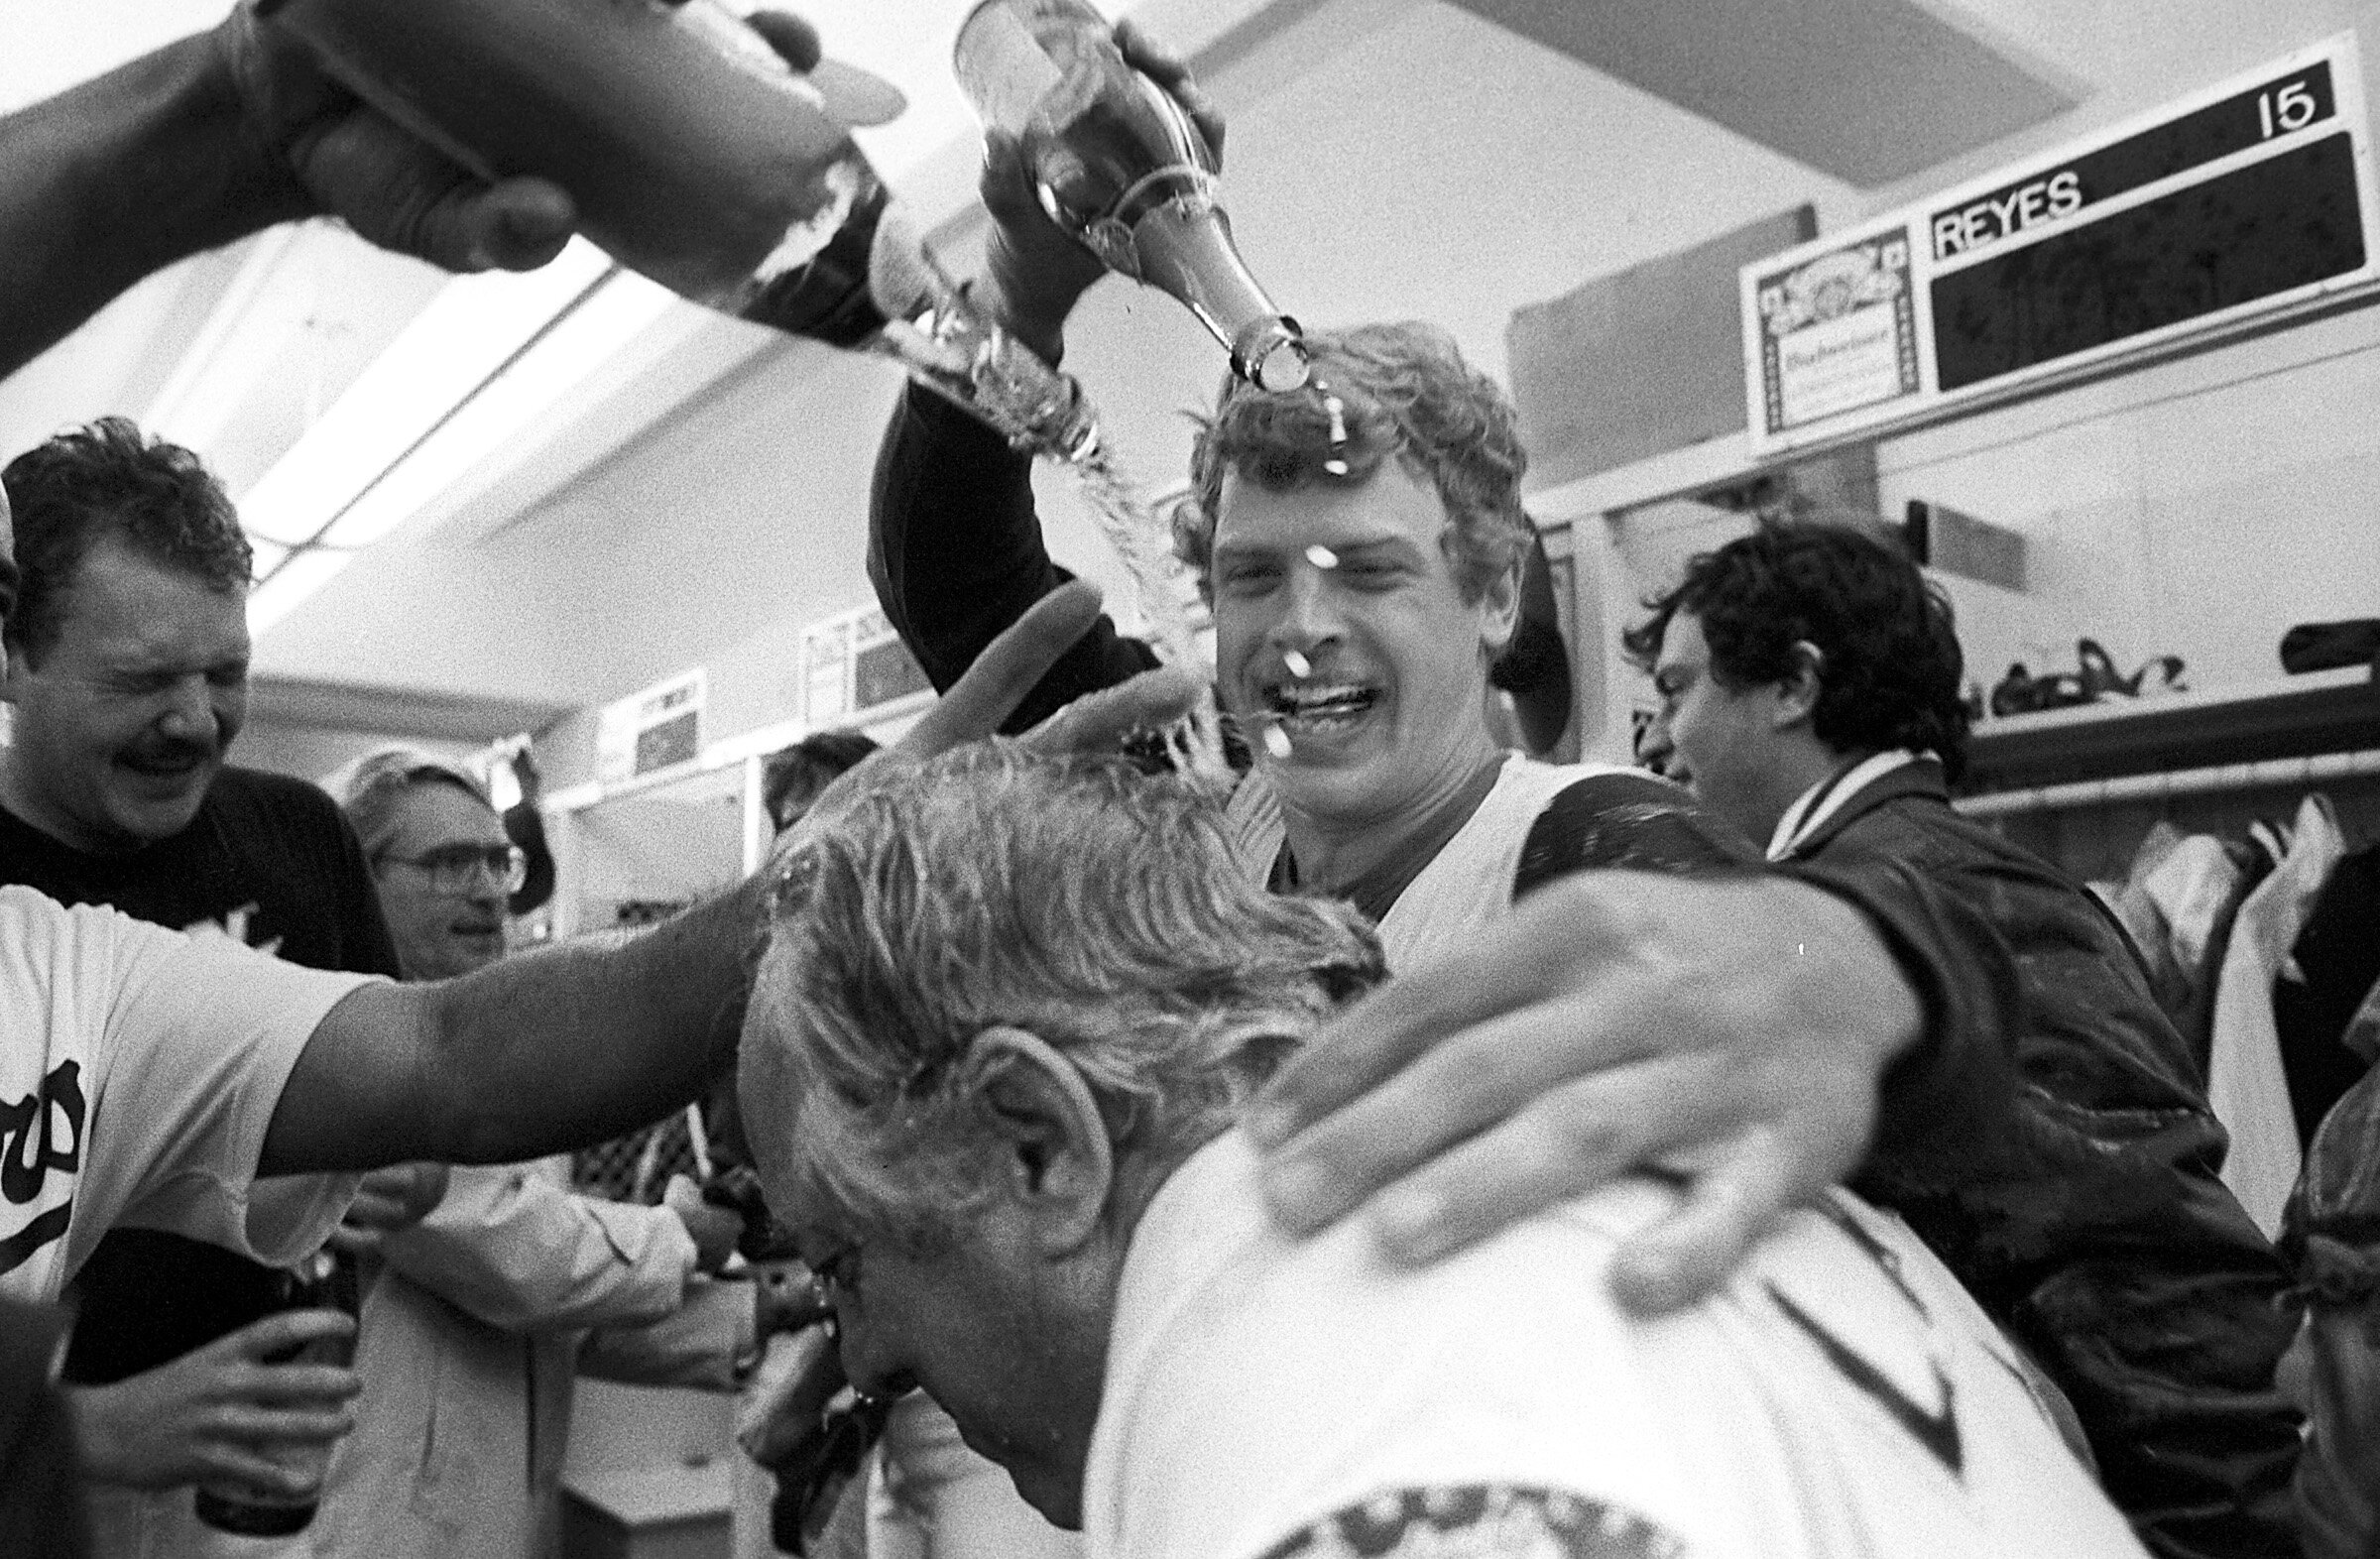  LOS ANGELES, CA - 1981: First baseman Greg Brock pours champagne on manager Tommy Lasorda #2 of the Los Angeles Dodgers in the clubhouse after winning the 1981 NLDS playoffs at Dodger Stadium, Los Angeles, California. (Photo by Jayne Kamin-Oncea/Get